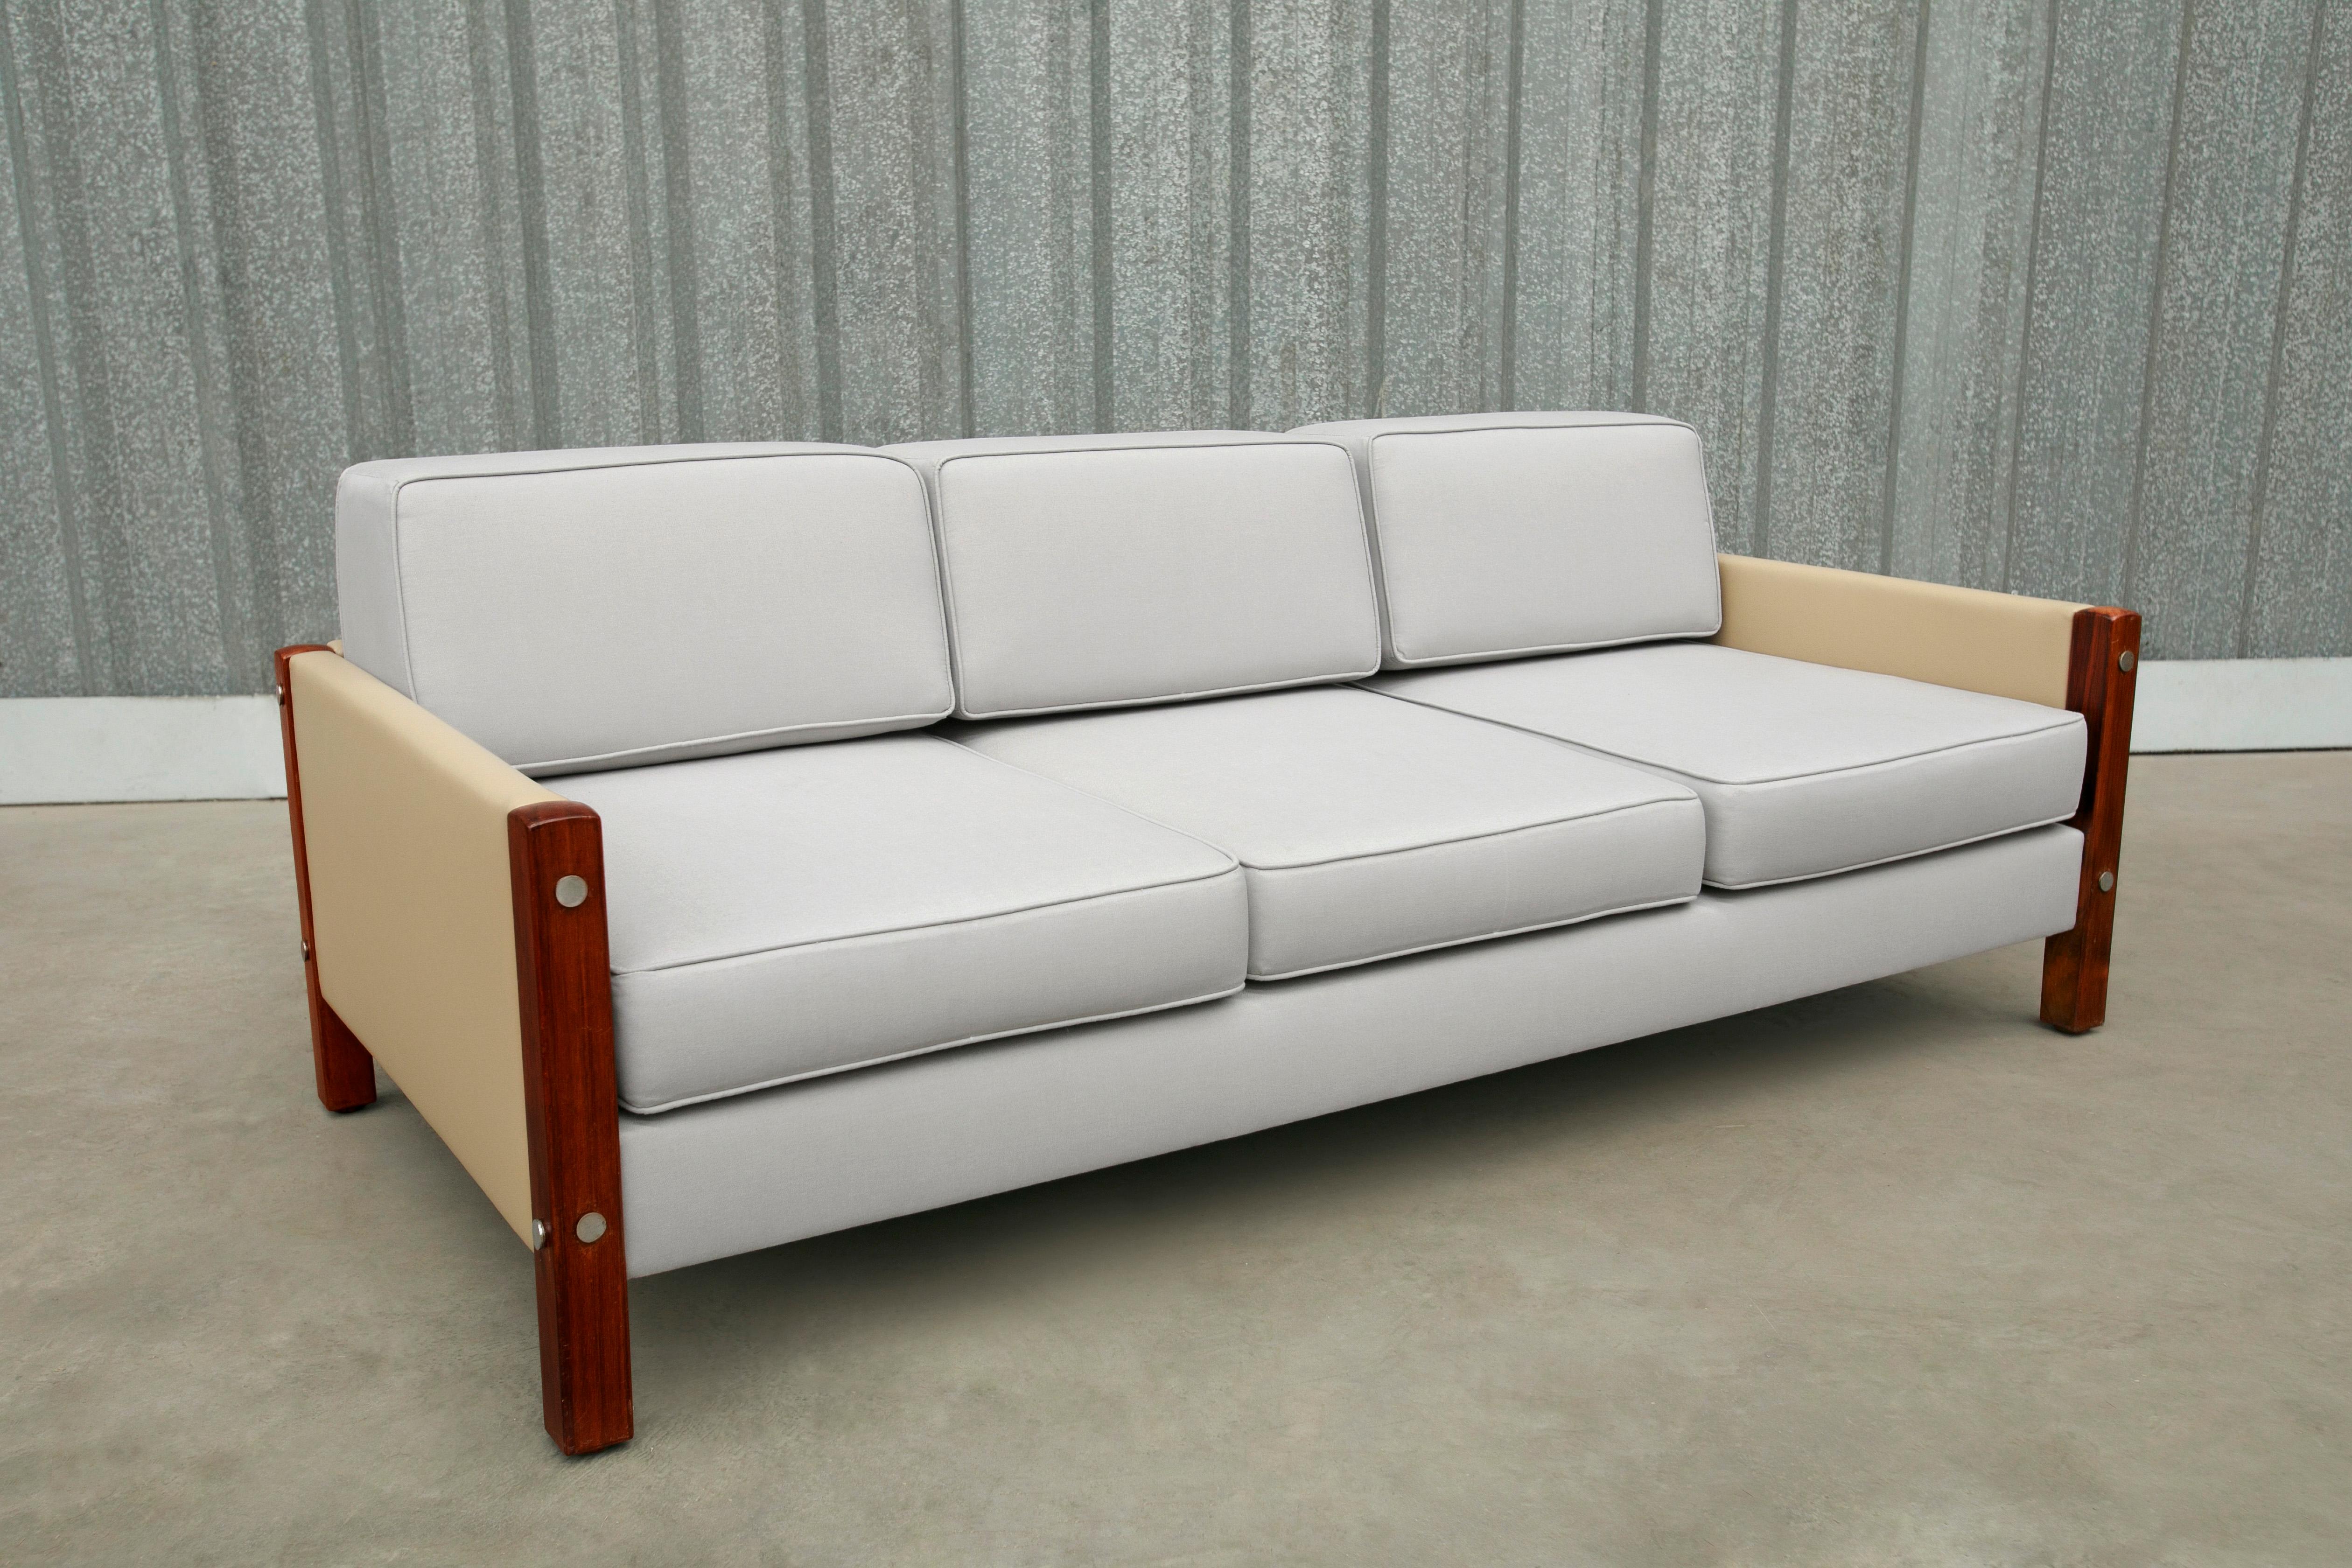 Brazilian Modern Sofa in Beige Leather & Grey Fabric by Sergio Rodrigues, Brazil In Good Condition For Sale In New York, NY